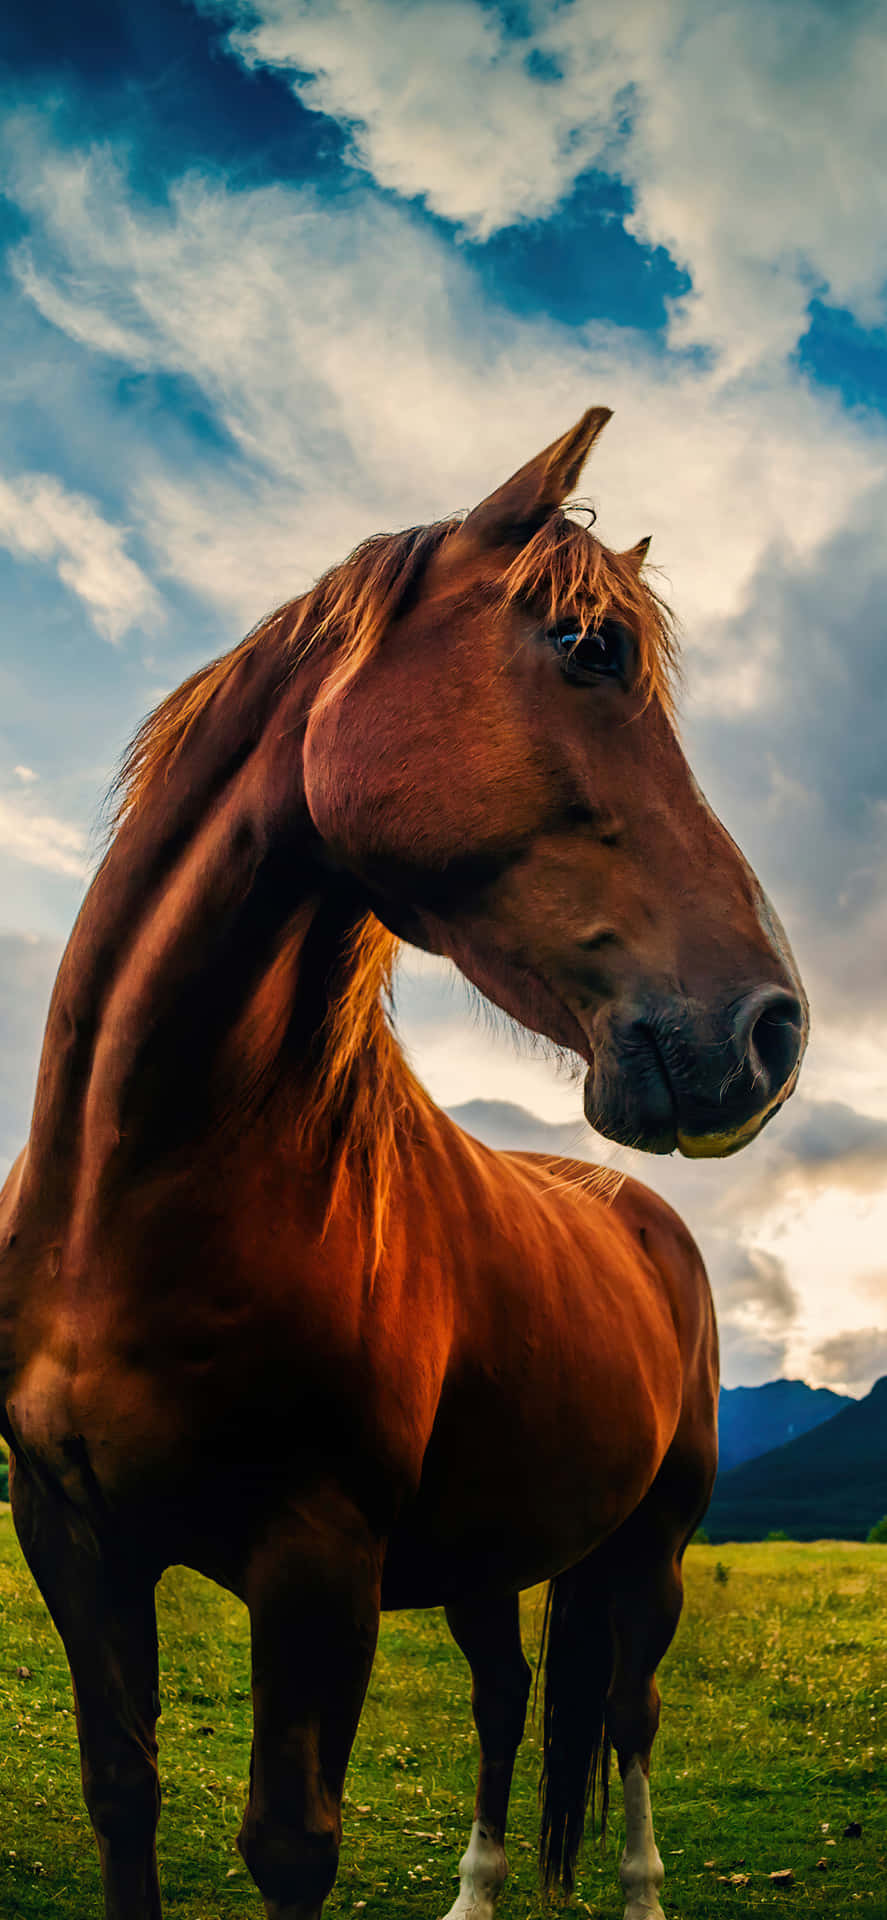 Admire the Beauty of the Horse Wallpaper